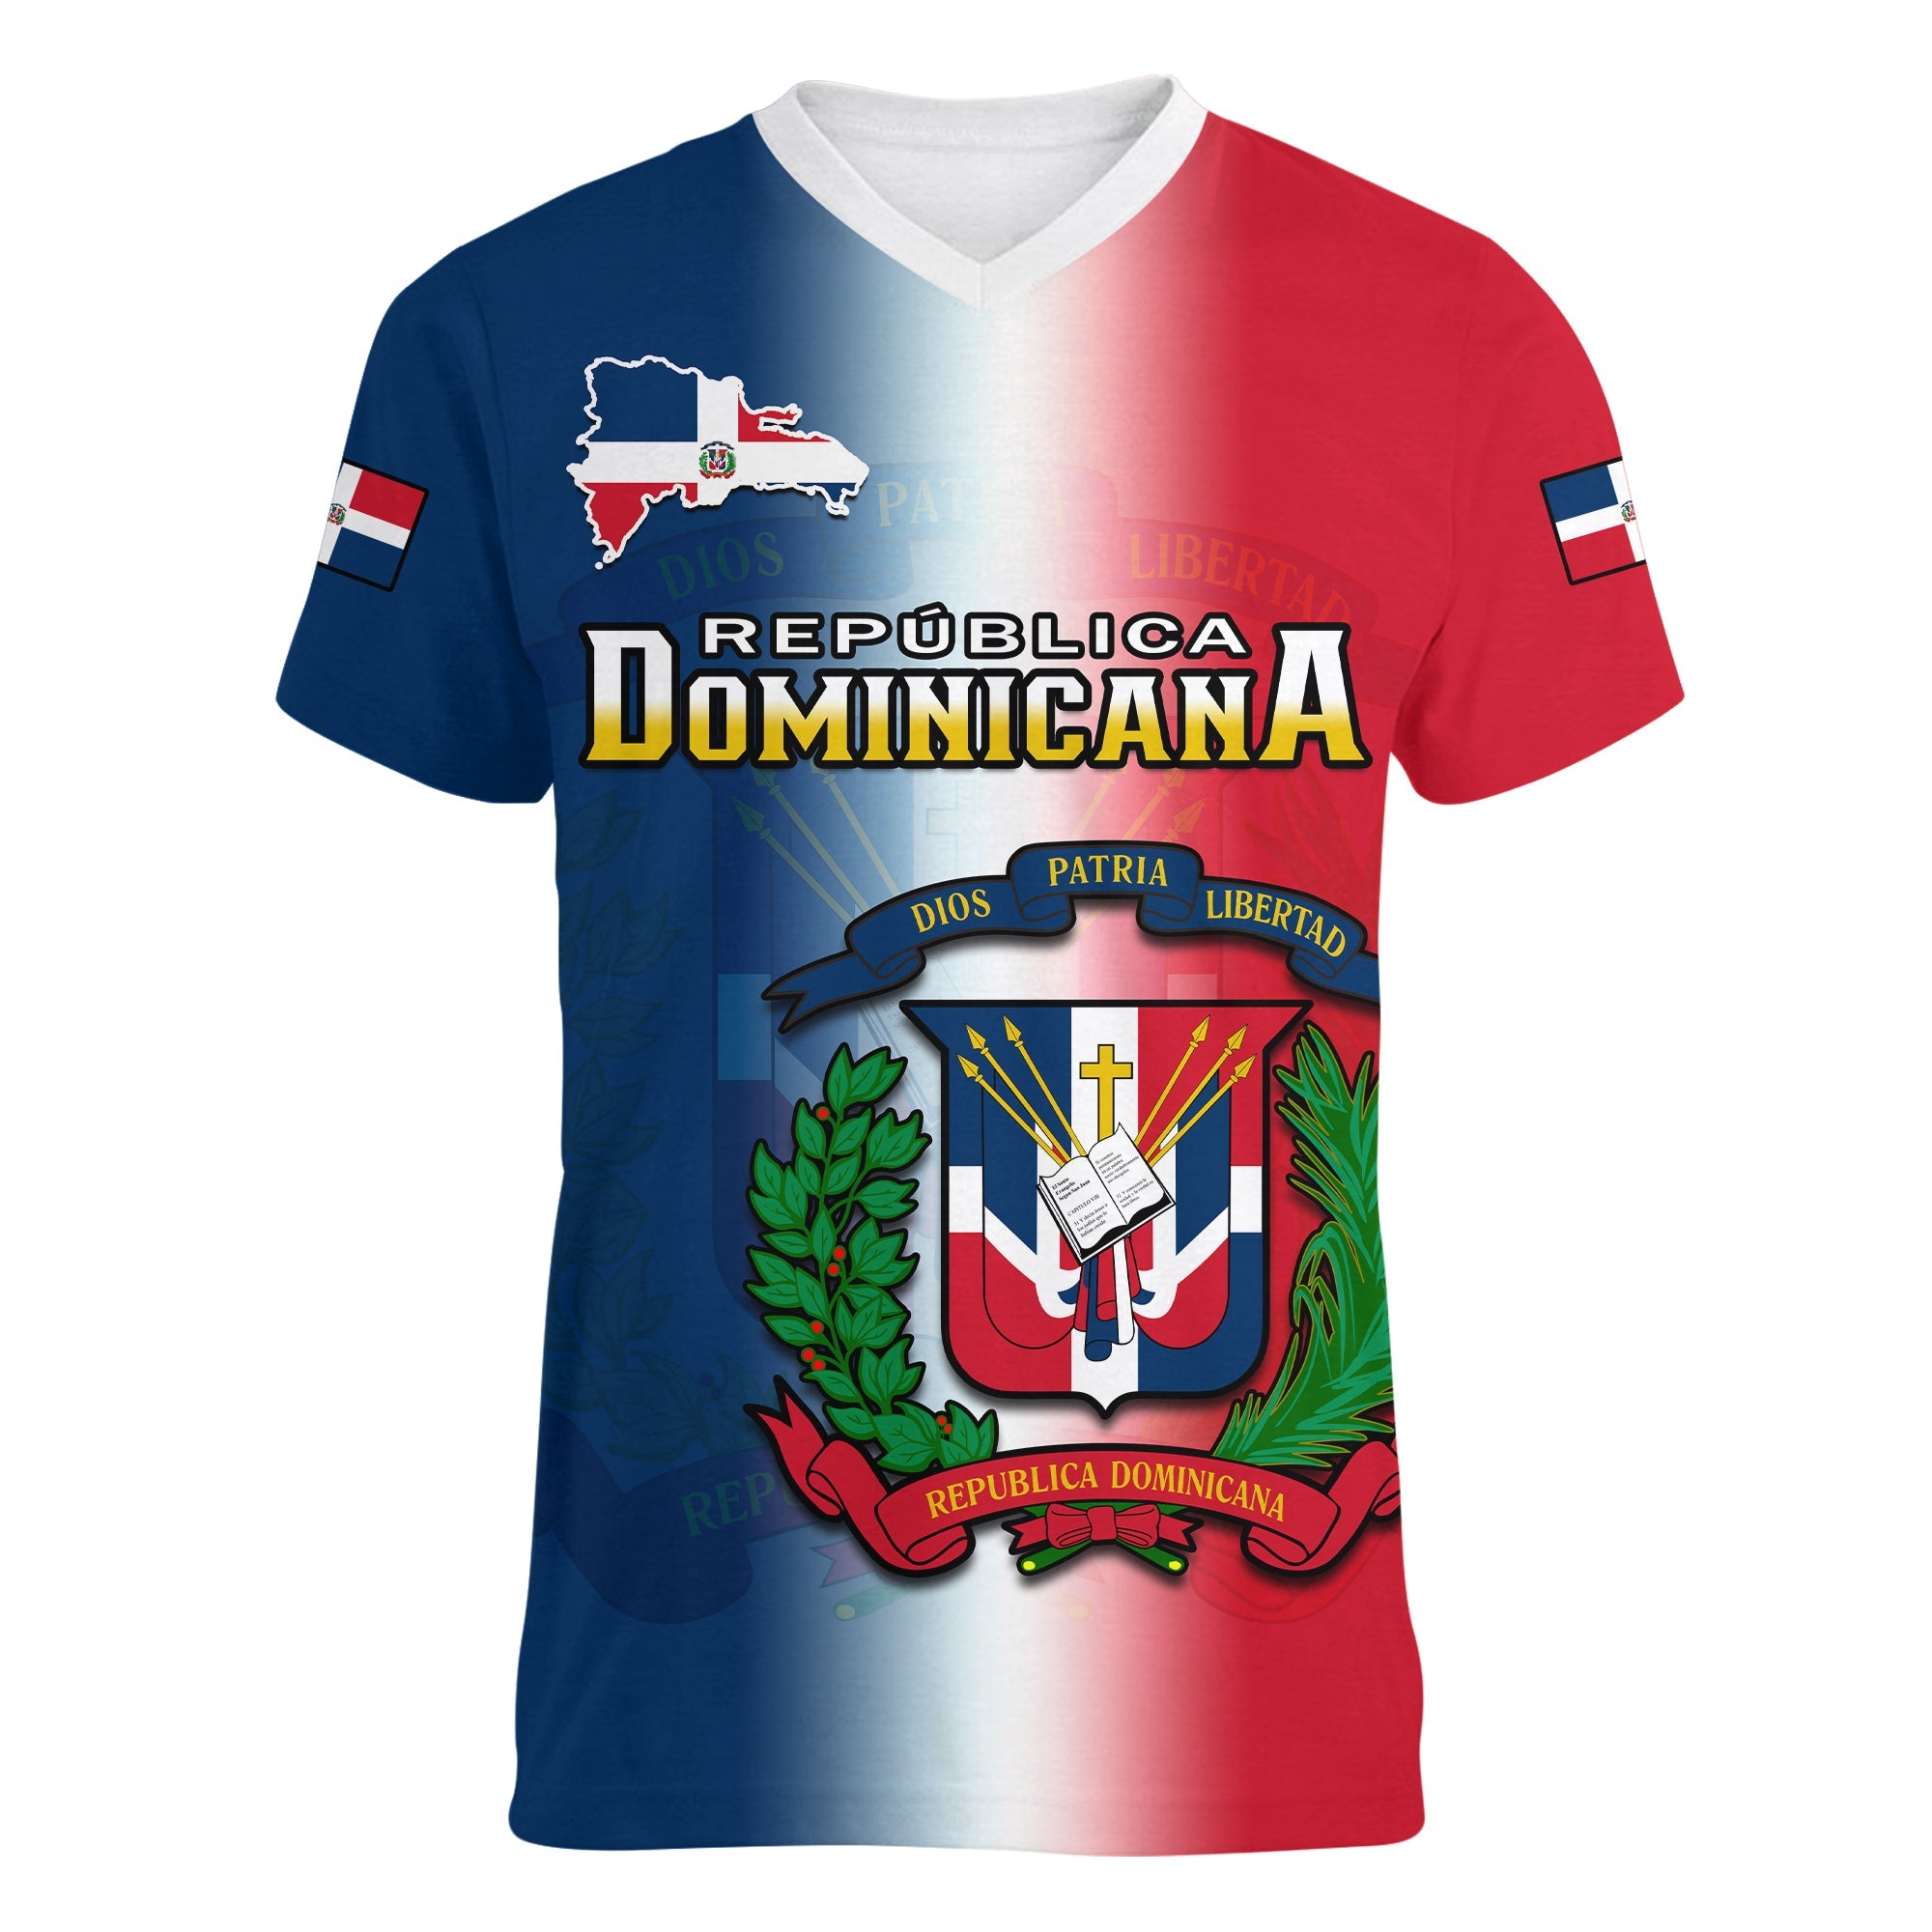 custom-personalised-dominican-republic-v-neck-t-shirt-dominicana-coat-of-arms-gradient-style